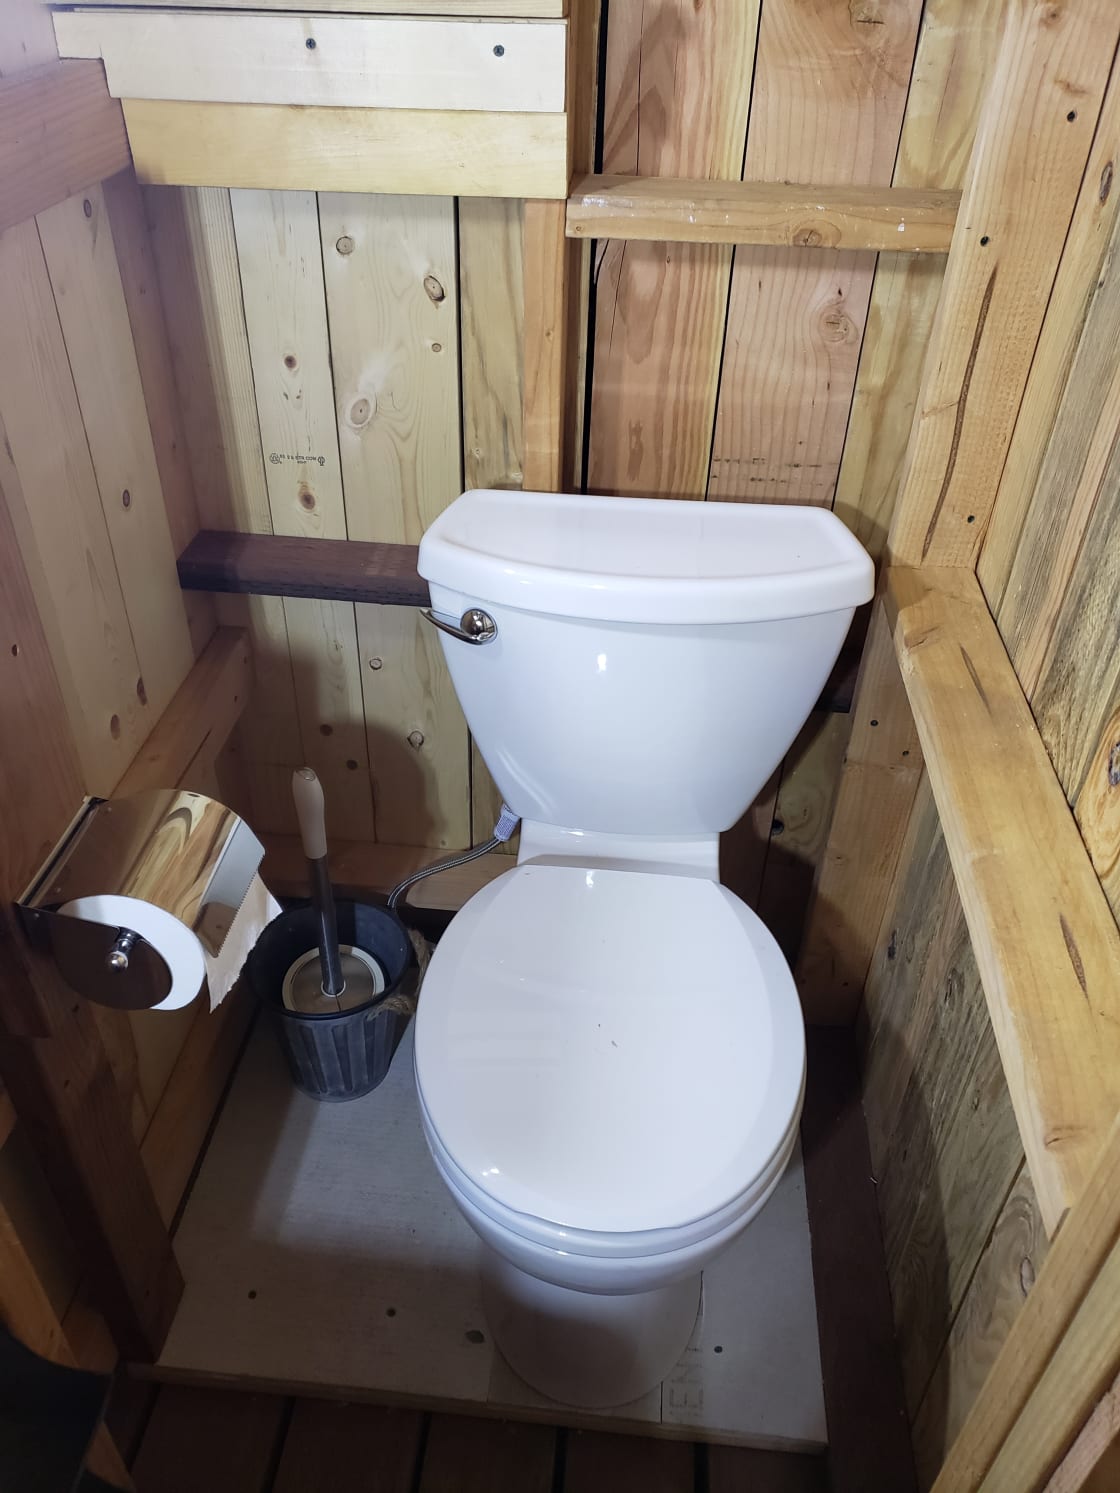 Our proper flushing porcelain toilet has a slow filling, gravity-fed water tank in the private all gender bathroom shared by both camps.  This picture was taken at night without a flash, showing the ample available light with both LED light switches turned on.